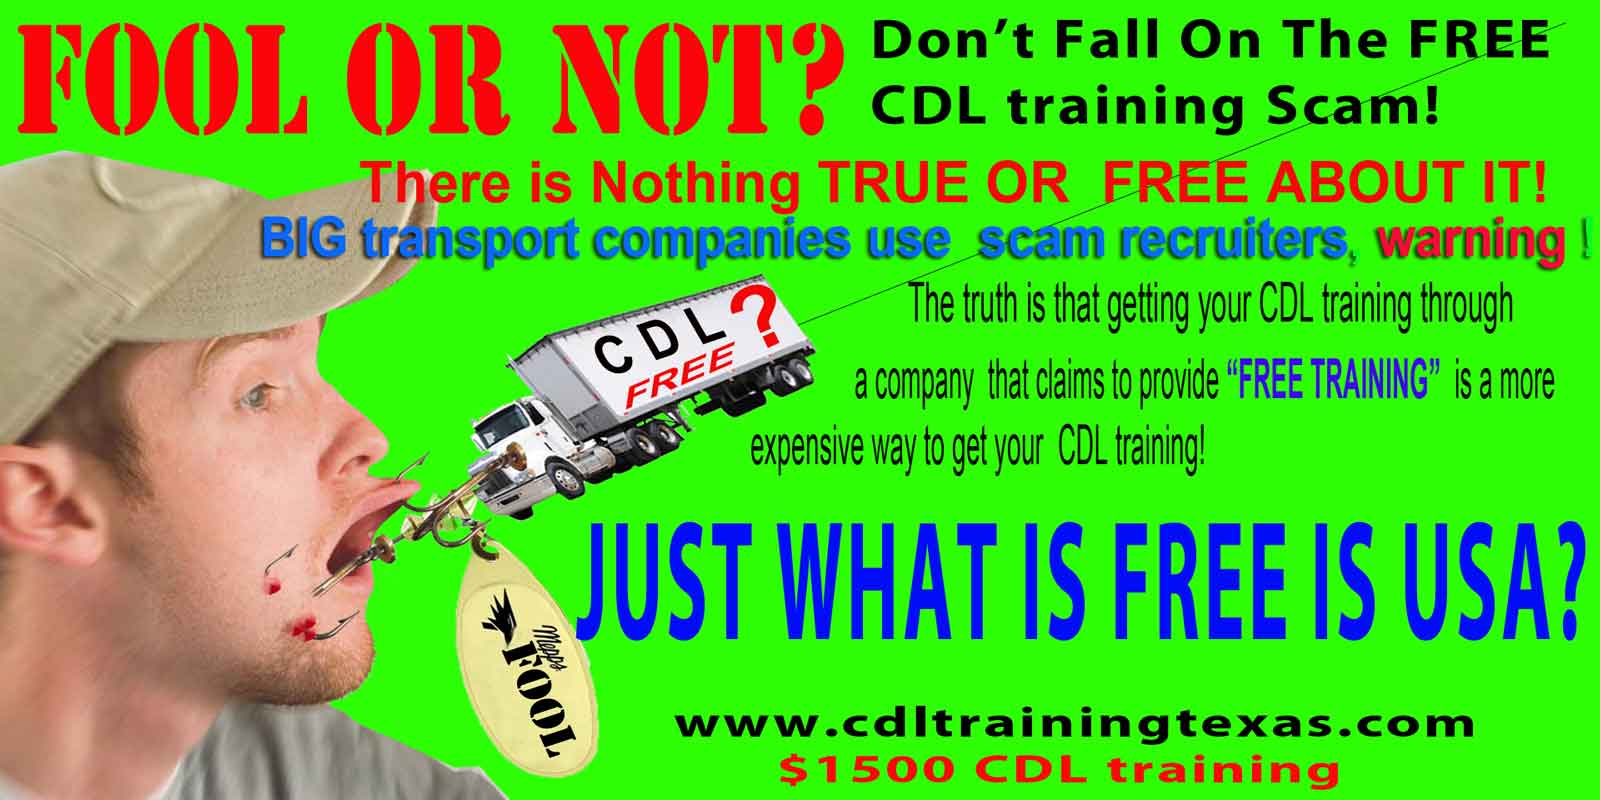 Sponsored free CDL training in Texas